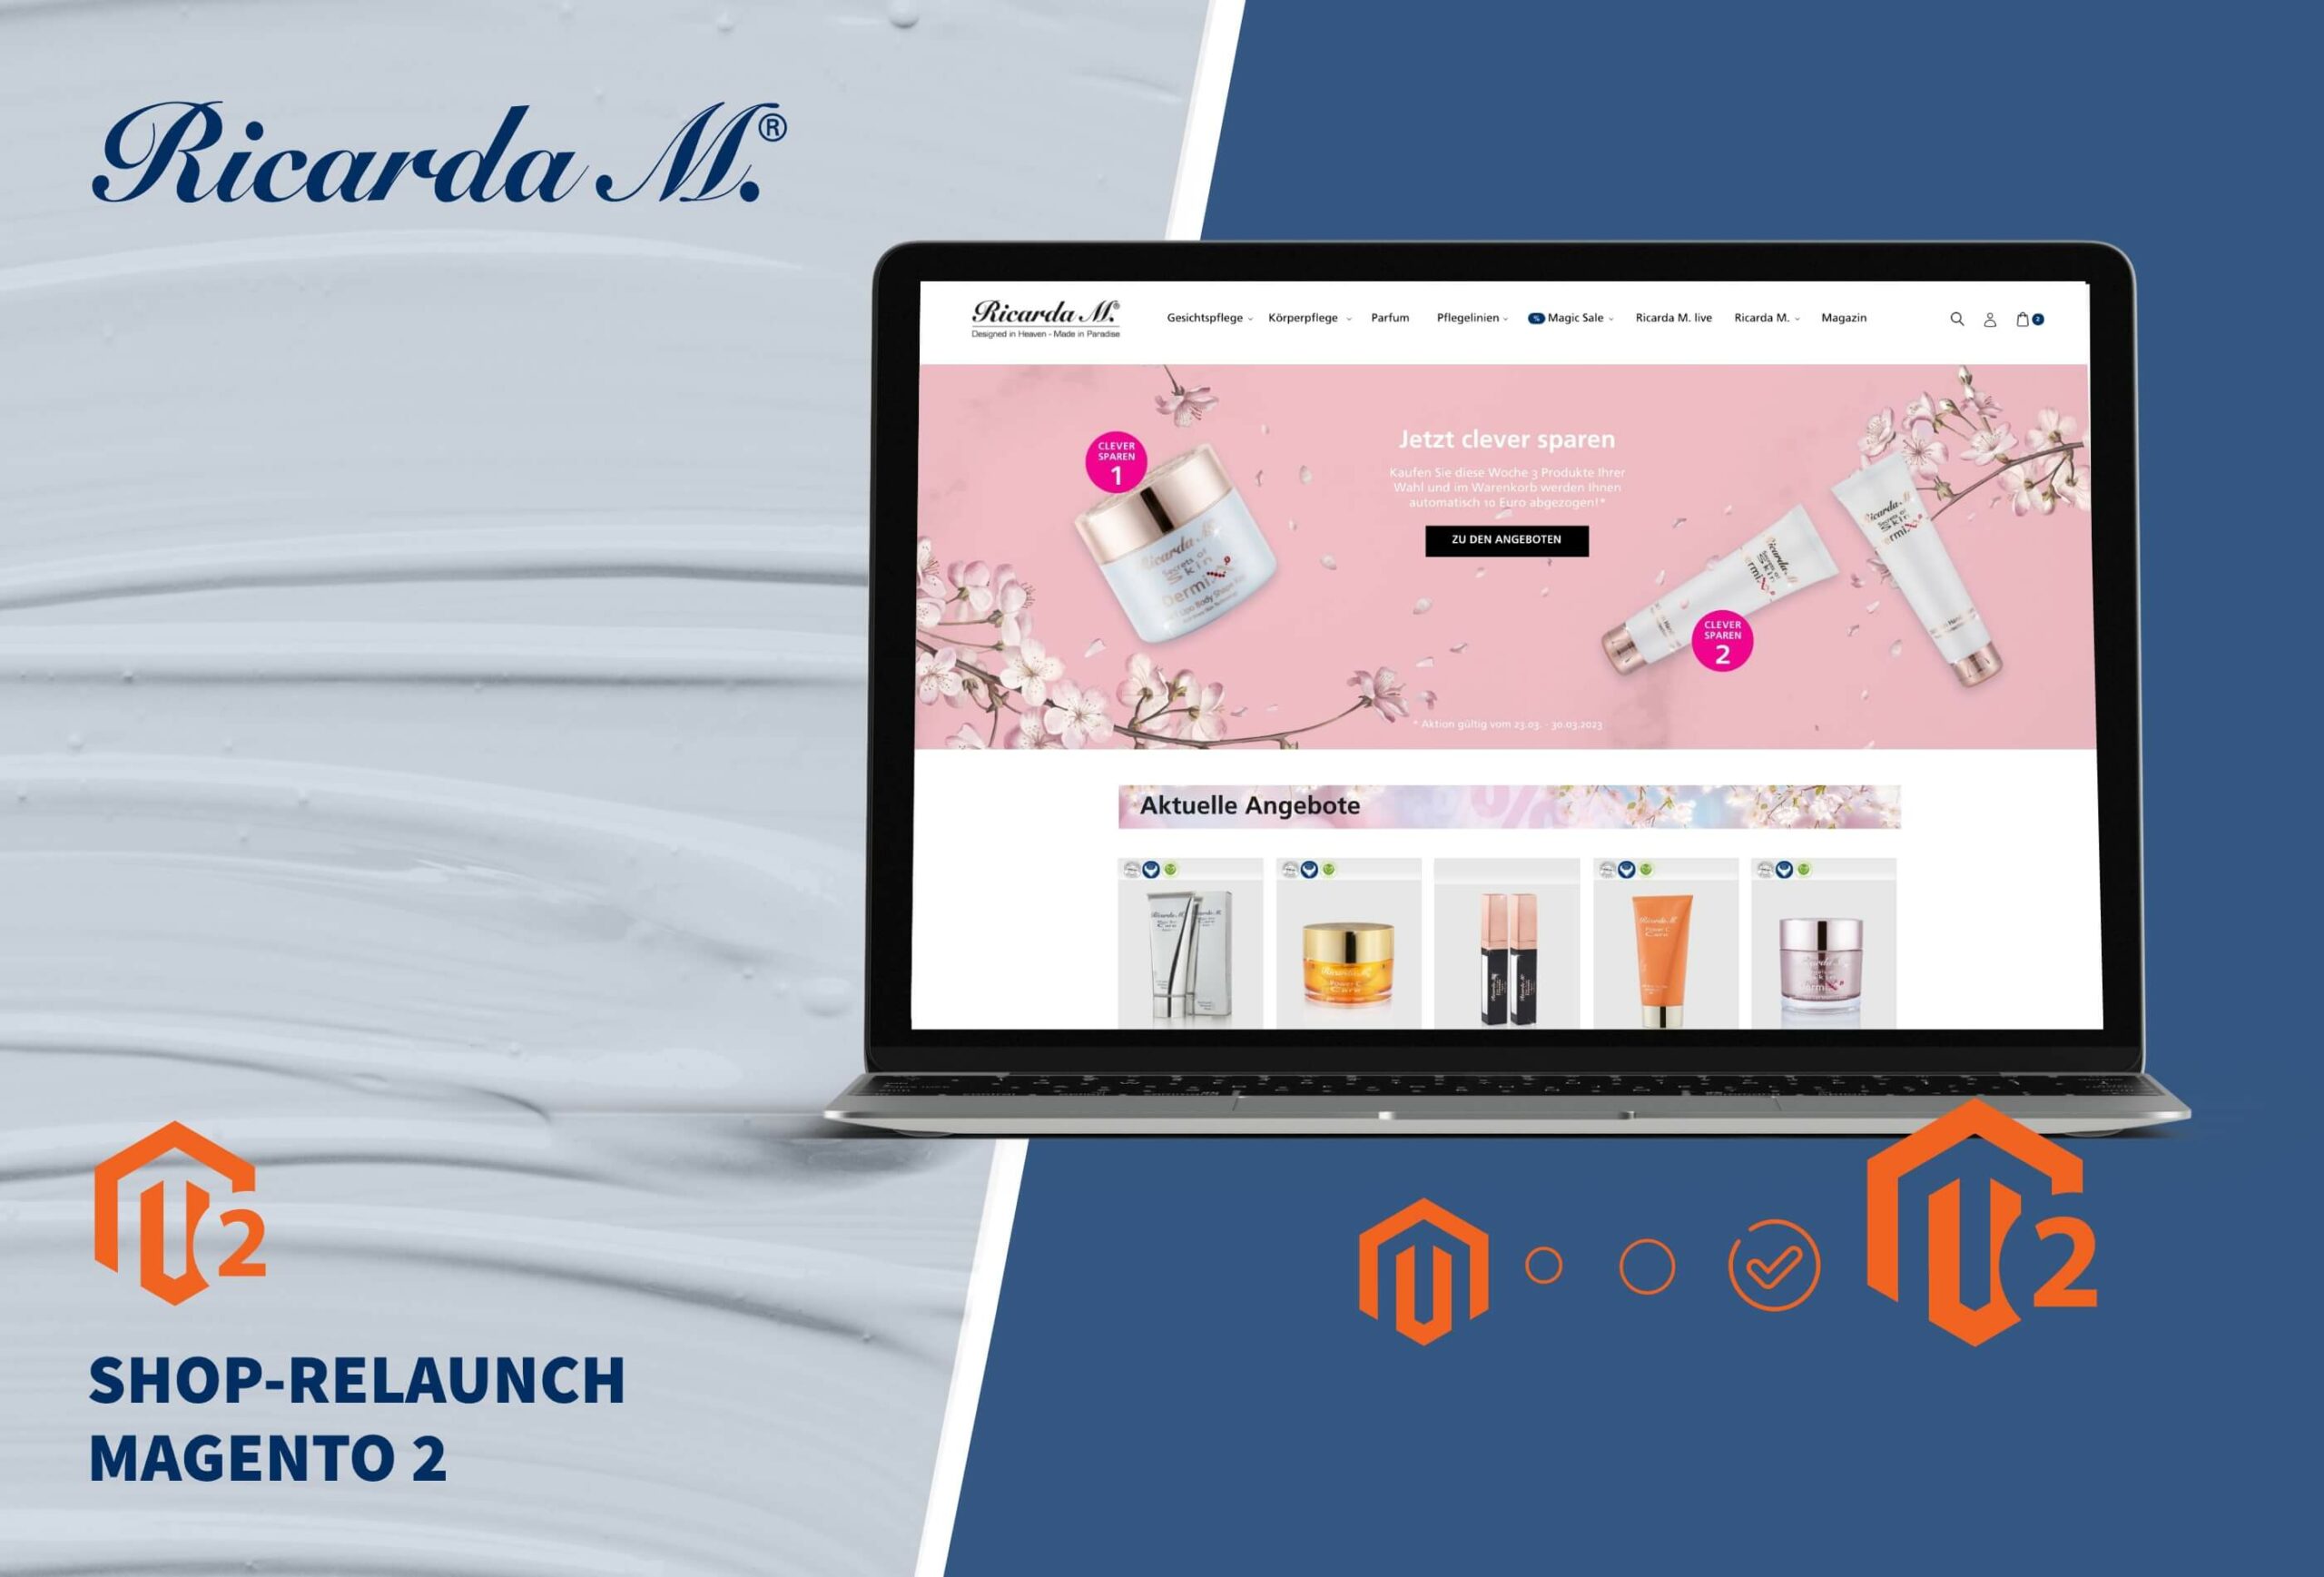 Store relaunch on Magento 2